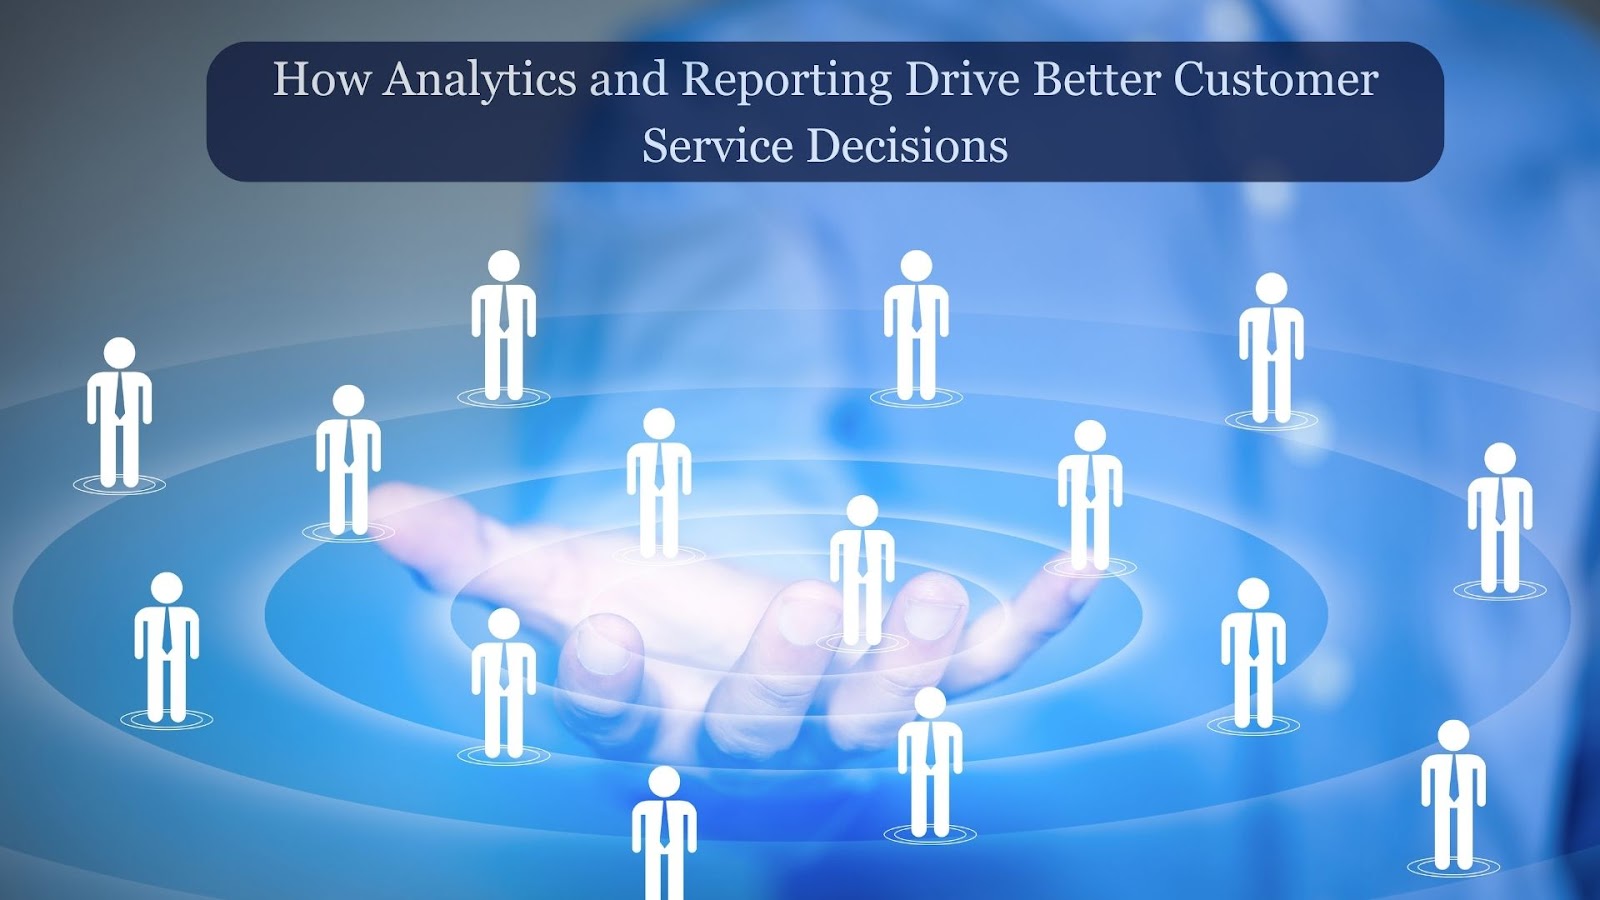 How Analytics and Reporting Drive Better Customer Service Decisions